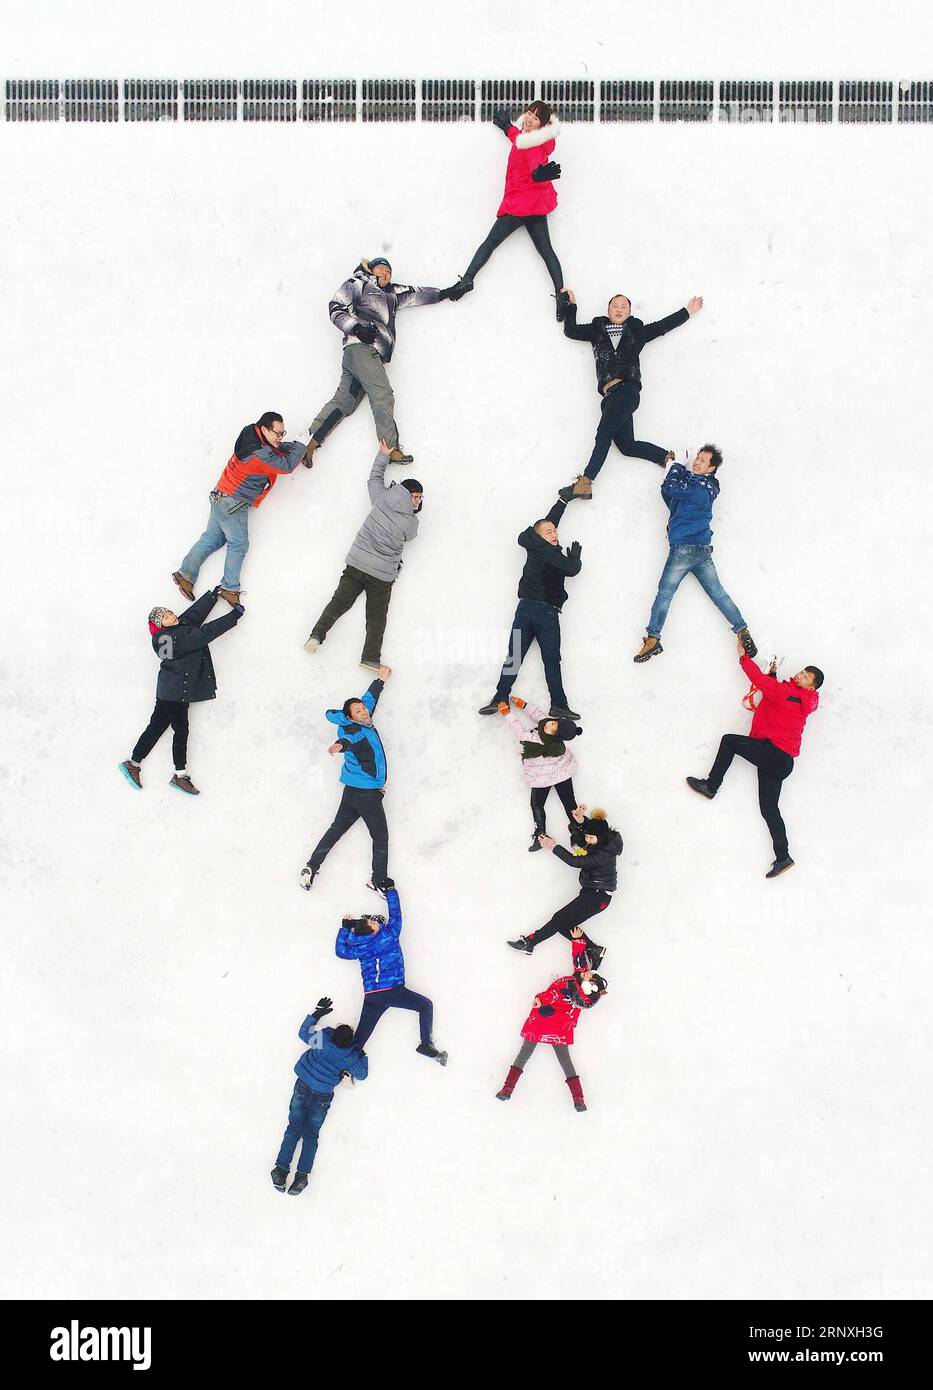 (180130) -- CHENZHOU, Jan. 30, 2018 () -- People pose for creative photos after a snowfall in Guiyang County of Chenzhou, central China s Hunan Province, Jan. 29, 2018. () (dhf) CHINA-HUNAN-SNOW-CREATIVE POSE (CN) Xinhua PUBLICATIONxNOTxINxCHN Stock Photo